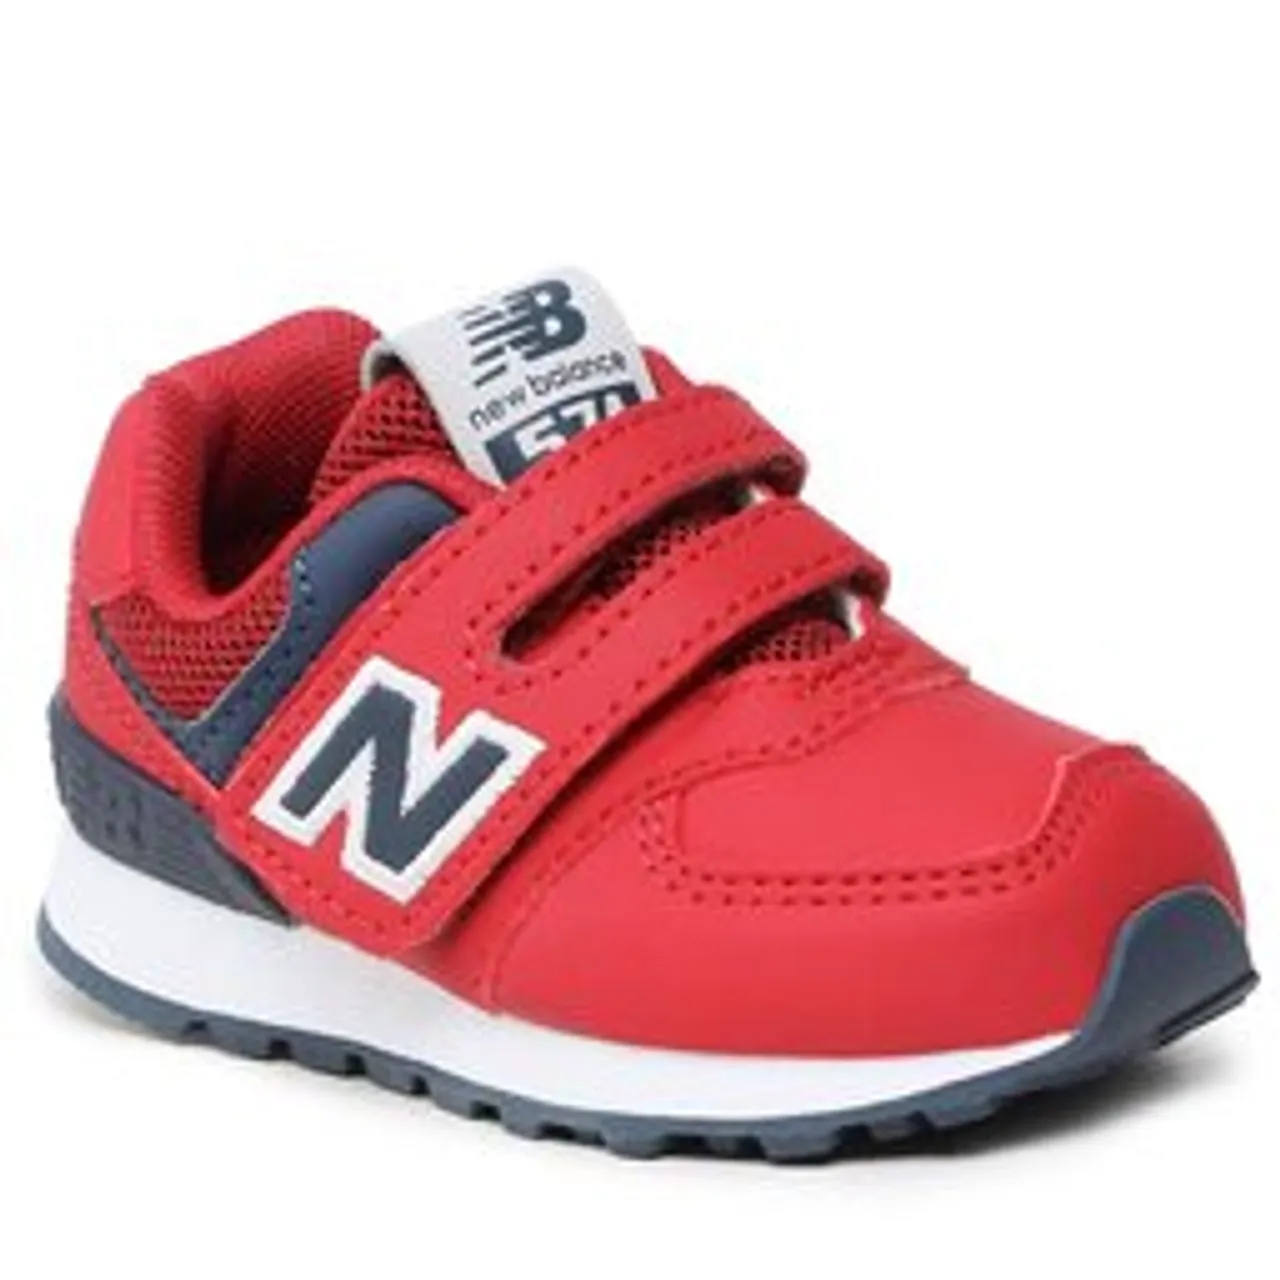 Sneakers New Balance IV574CR1 Rot